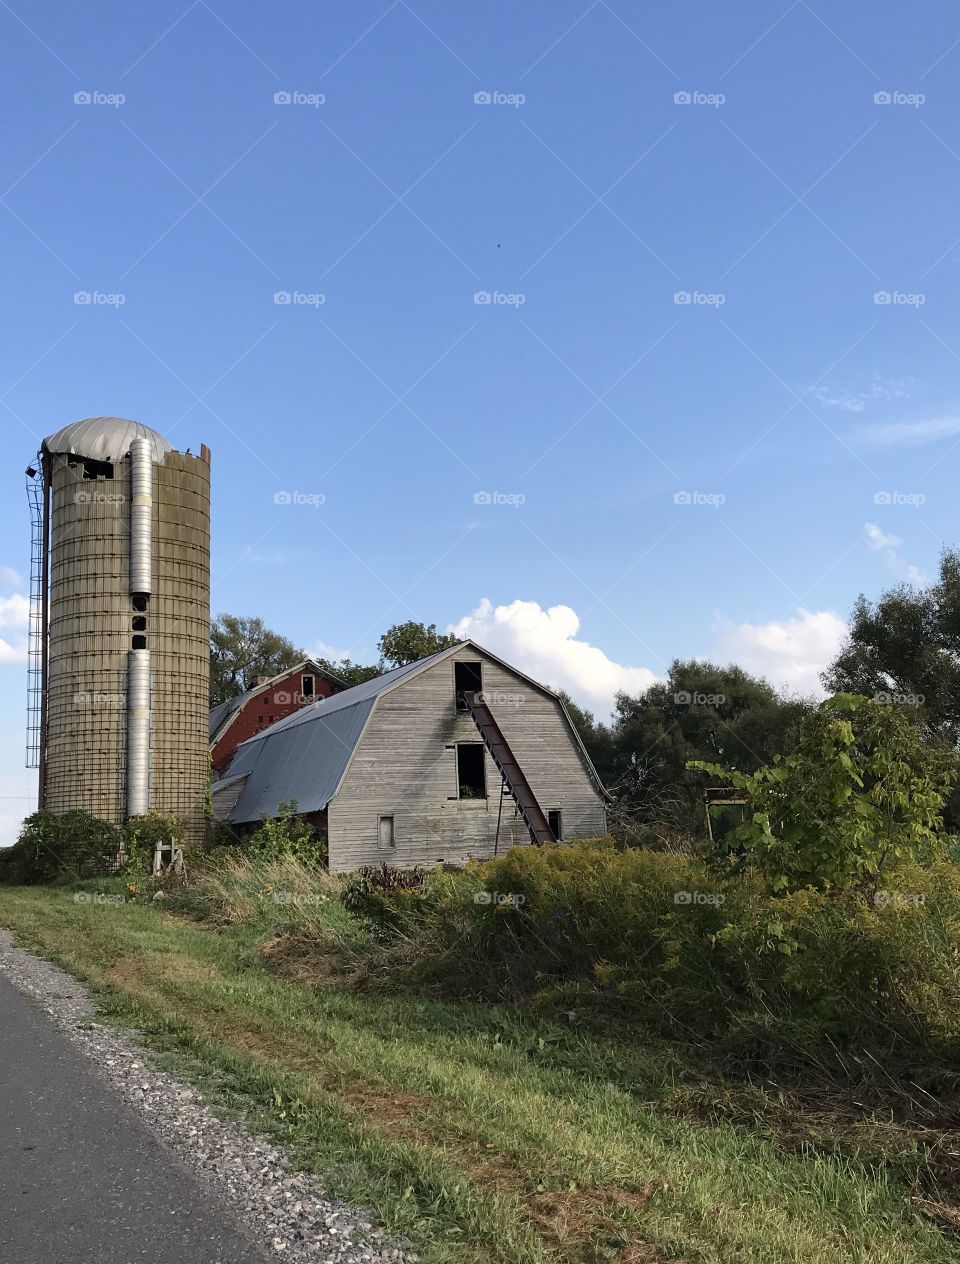 Barn and silo in upstate New York